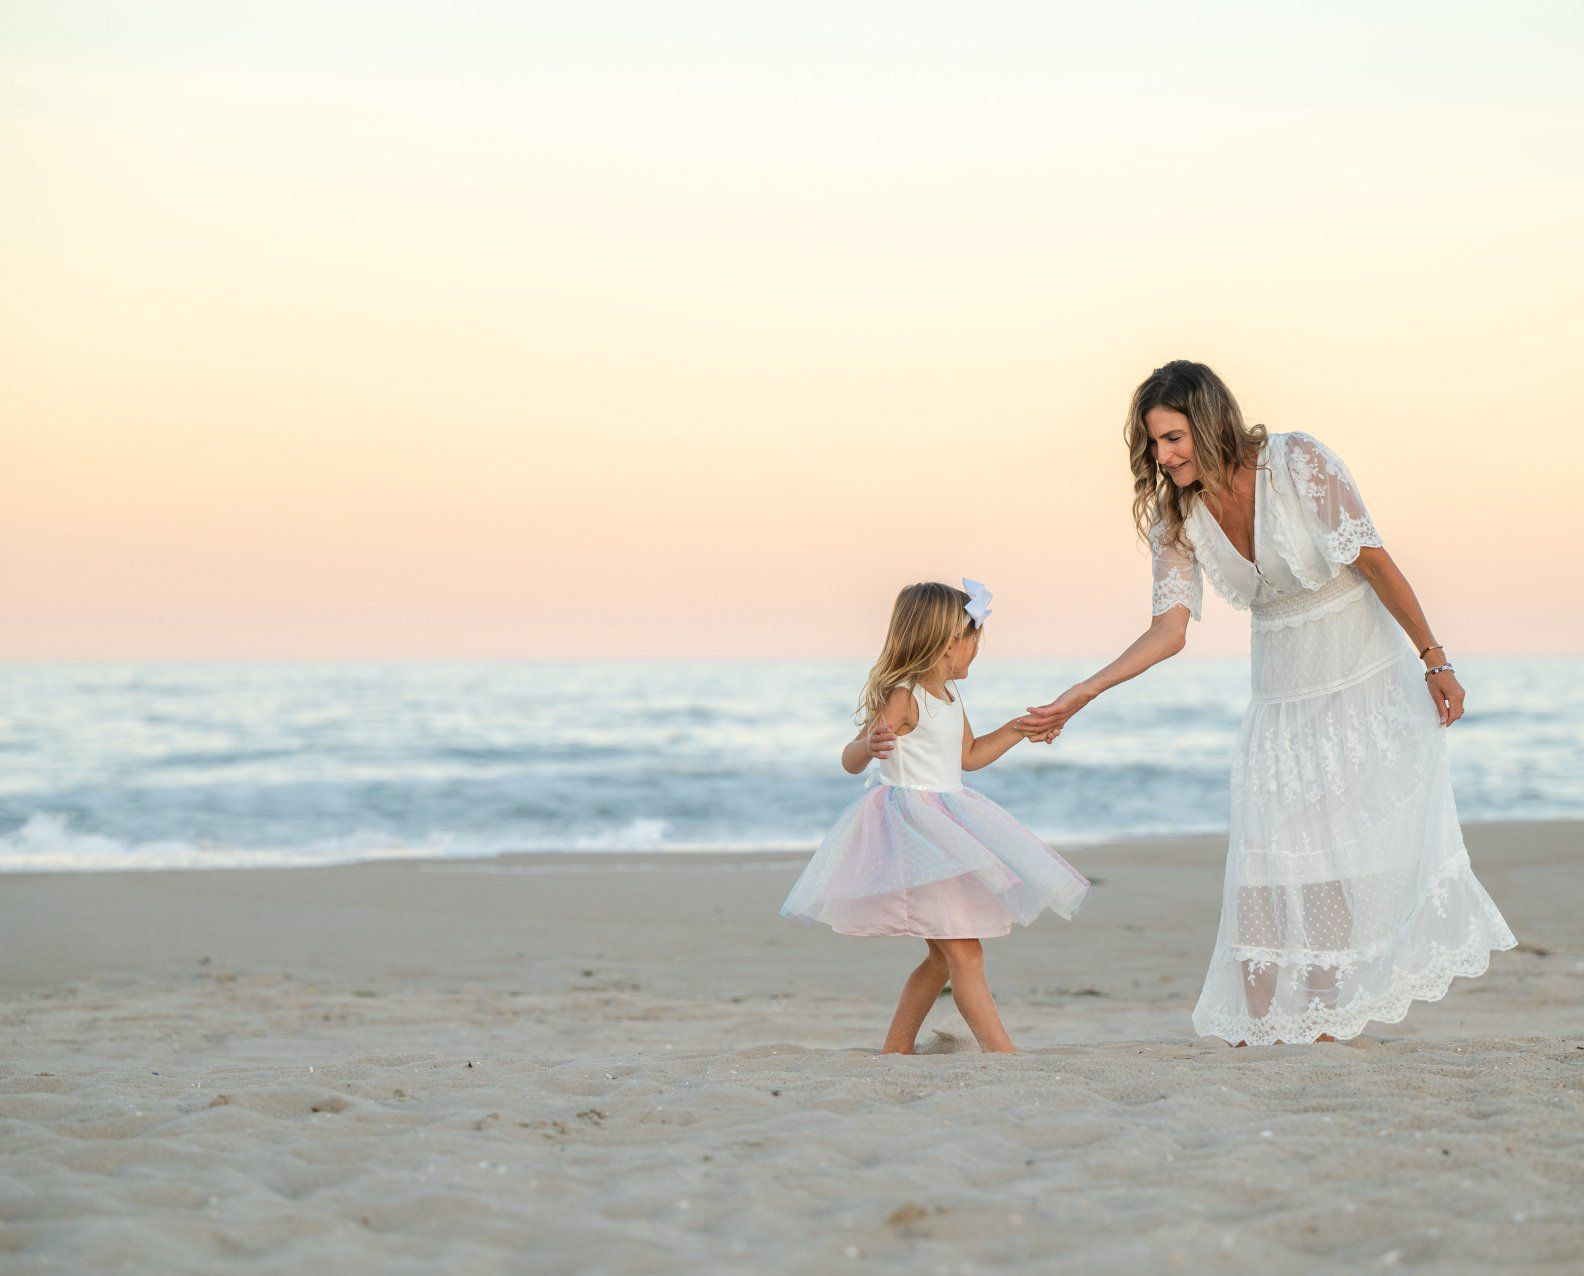 Dr. Kimberly and her young daughter on a beach at sunset.